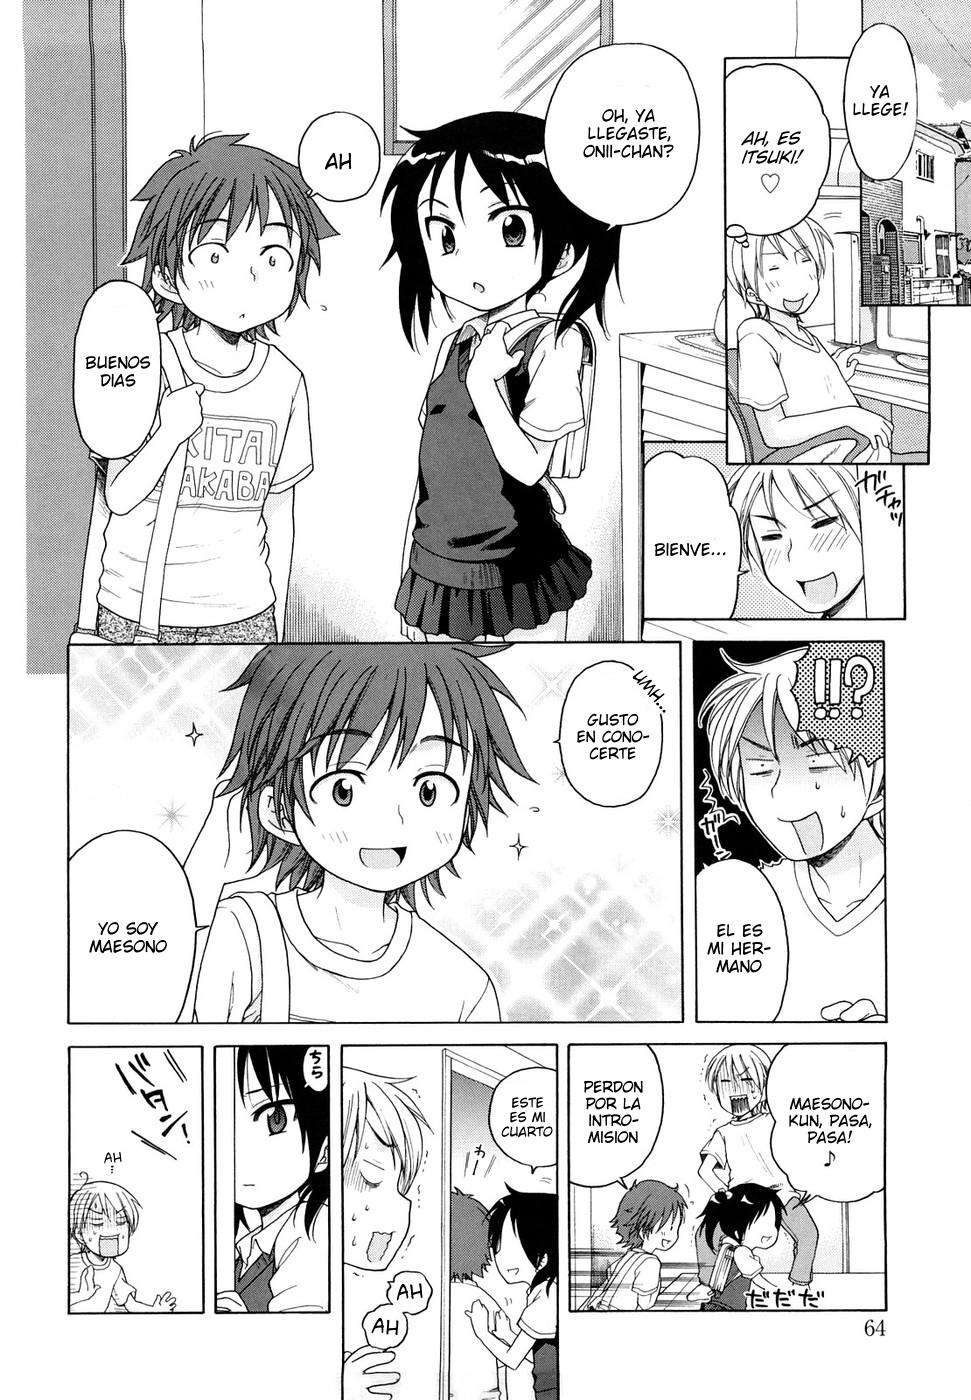 Me gustas Onii-chan! Chapter-4 - 5